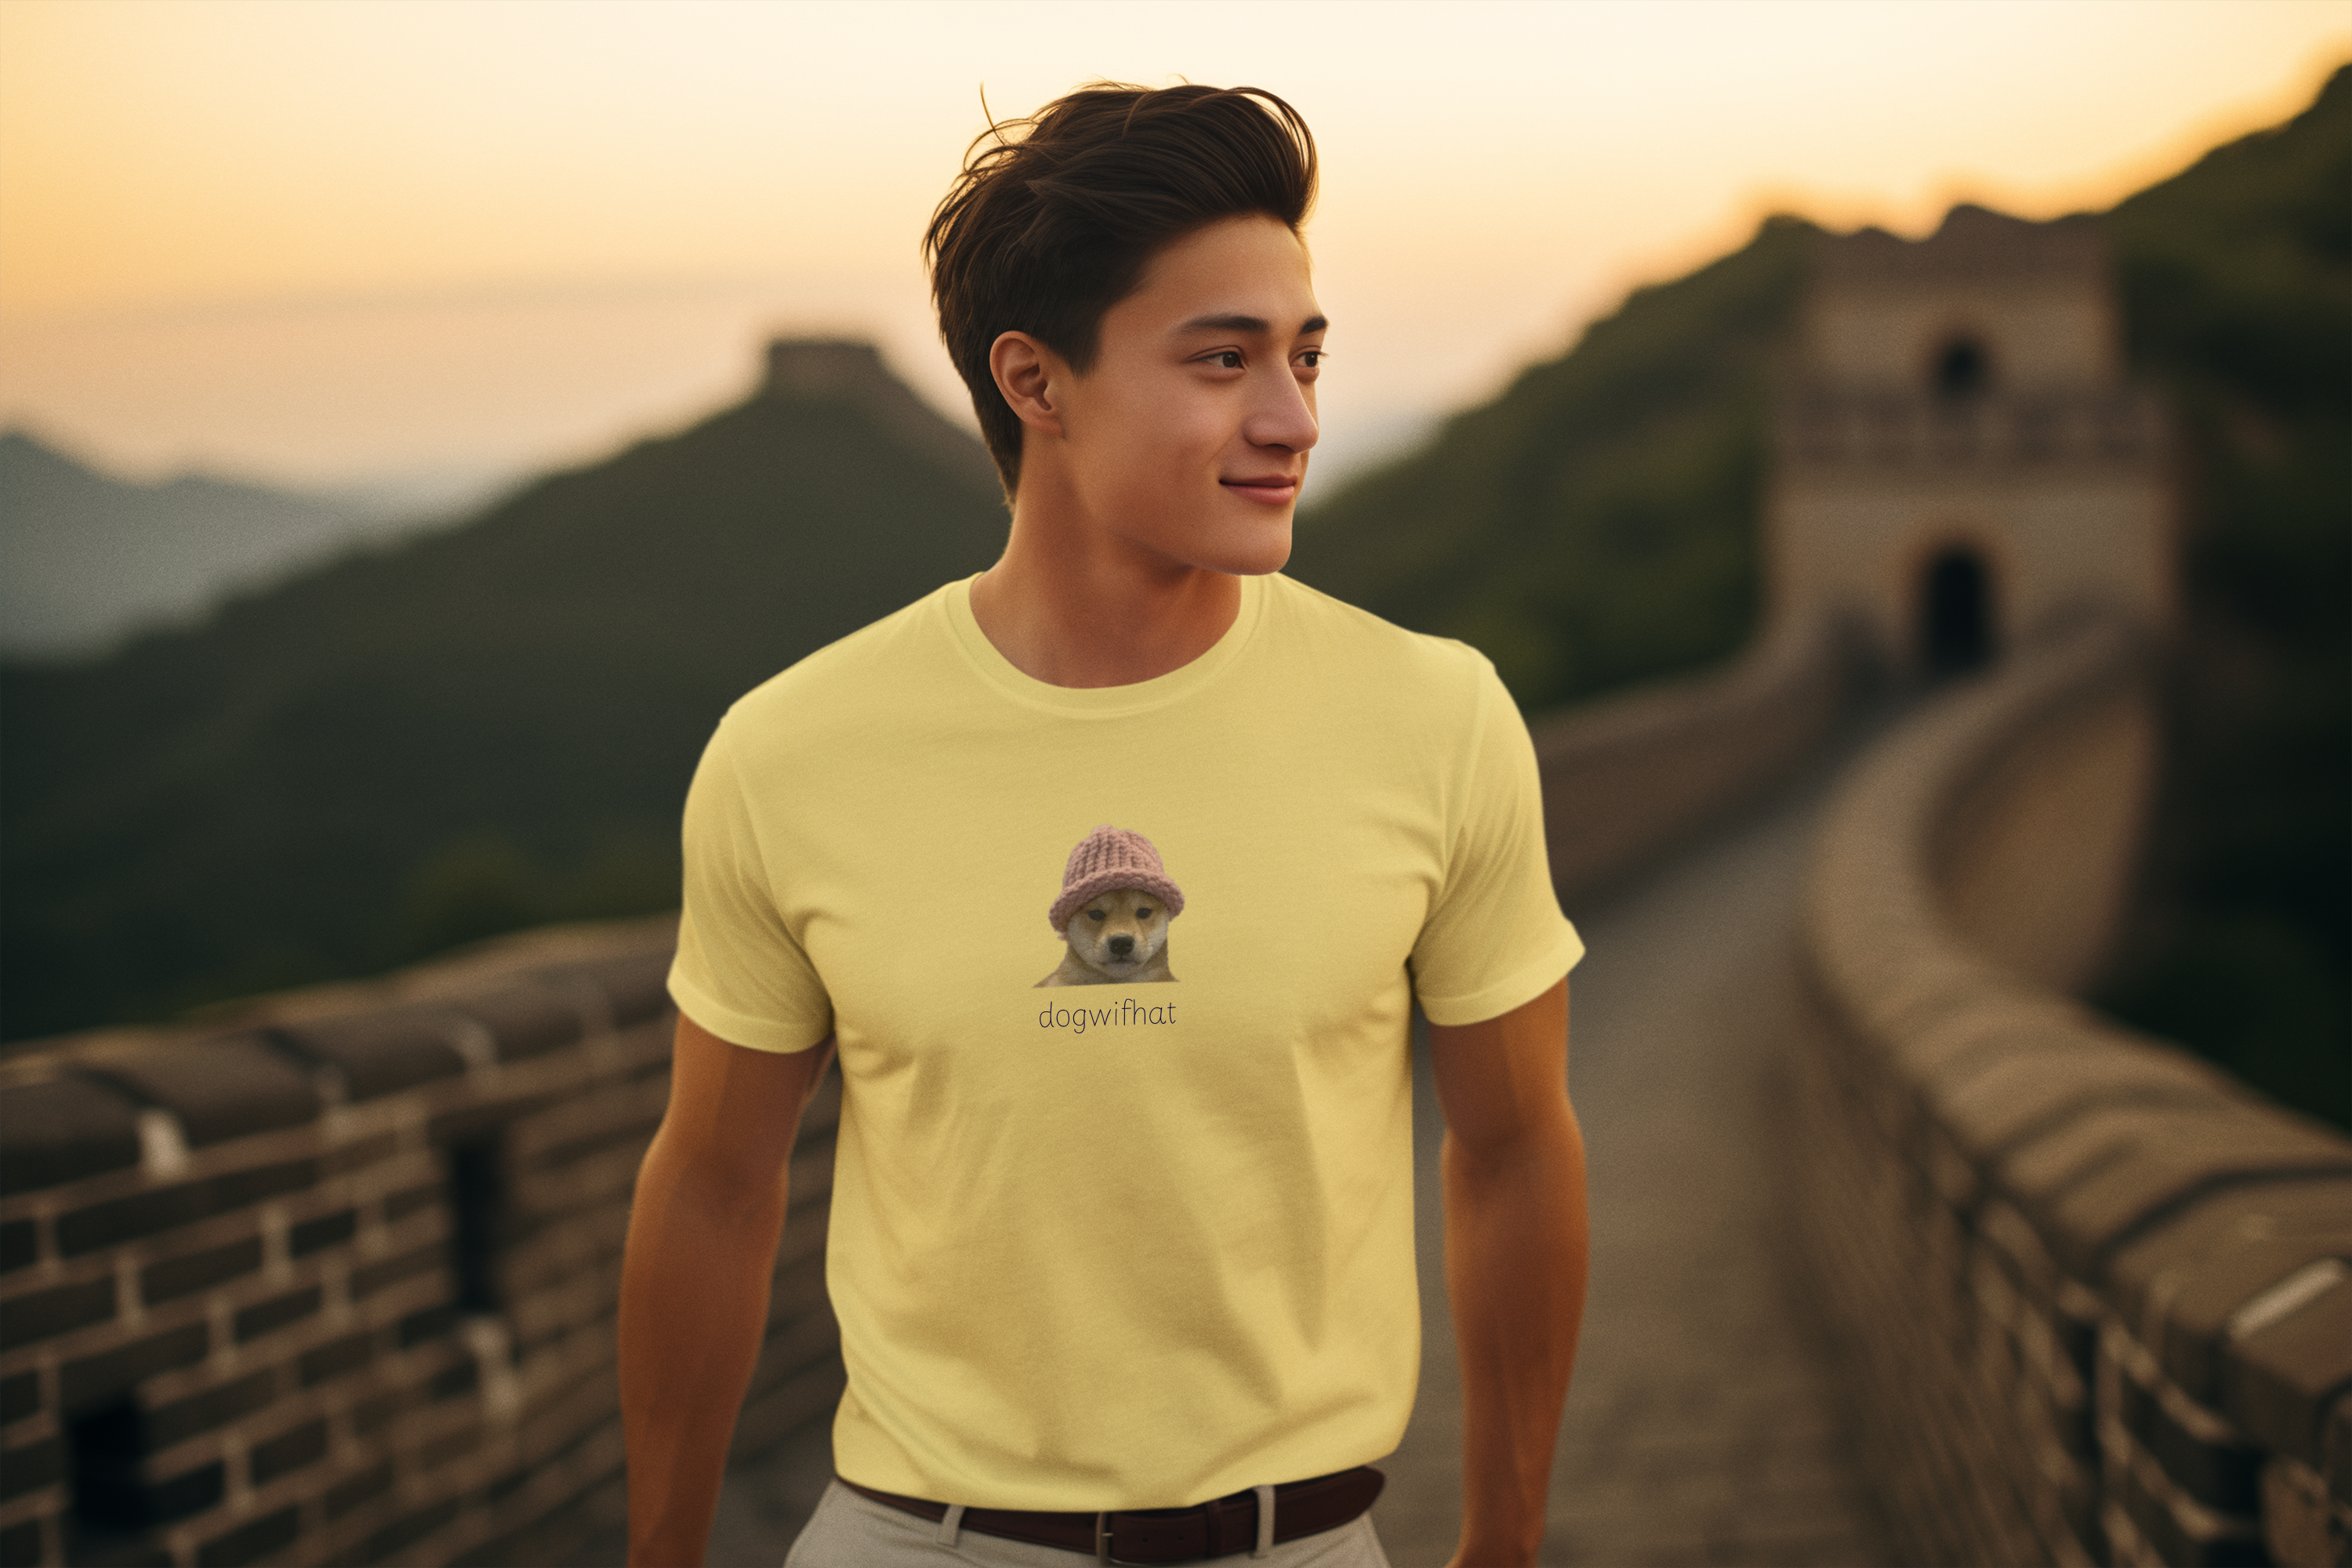 man wearing a yellow dogwifhat cryptocurrency t-shirt